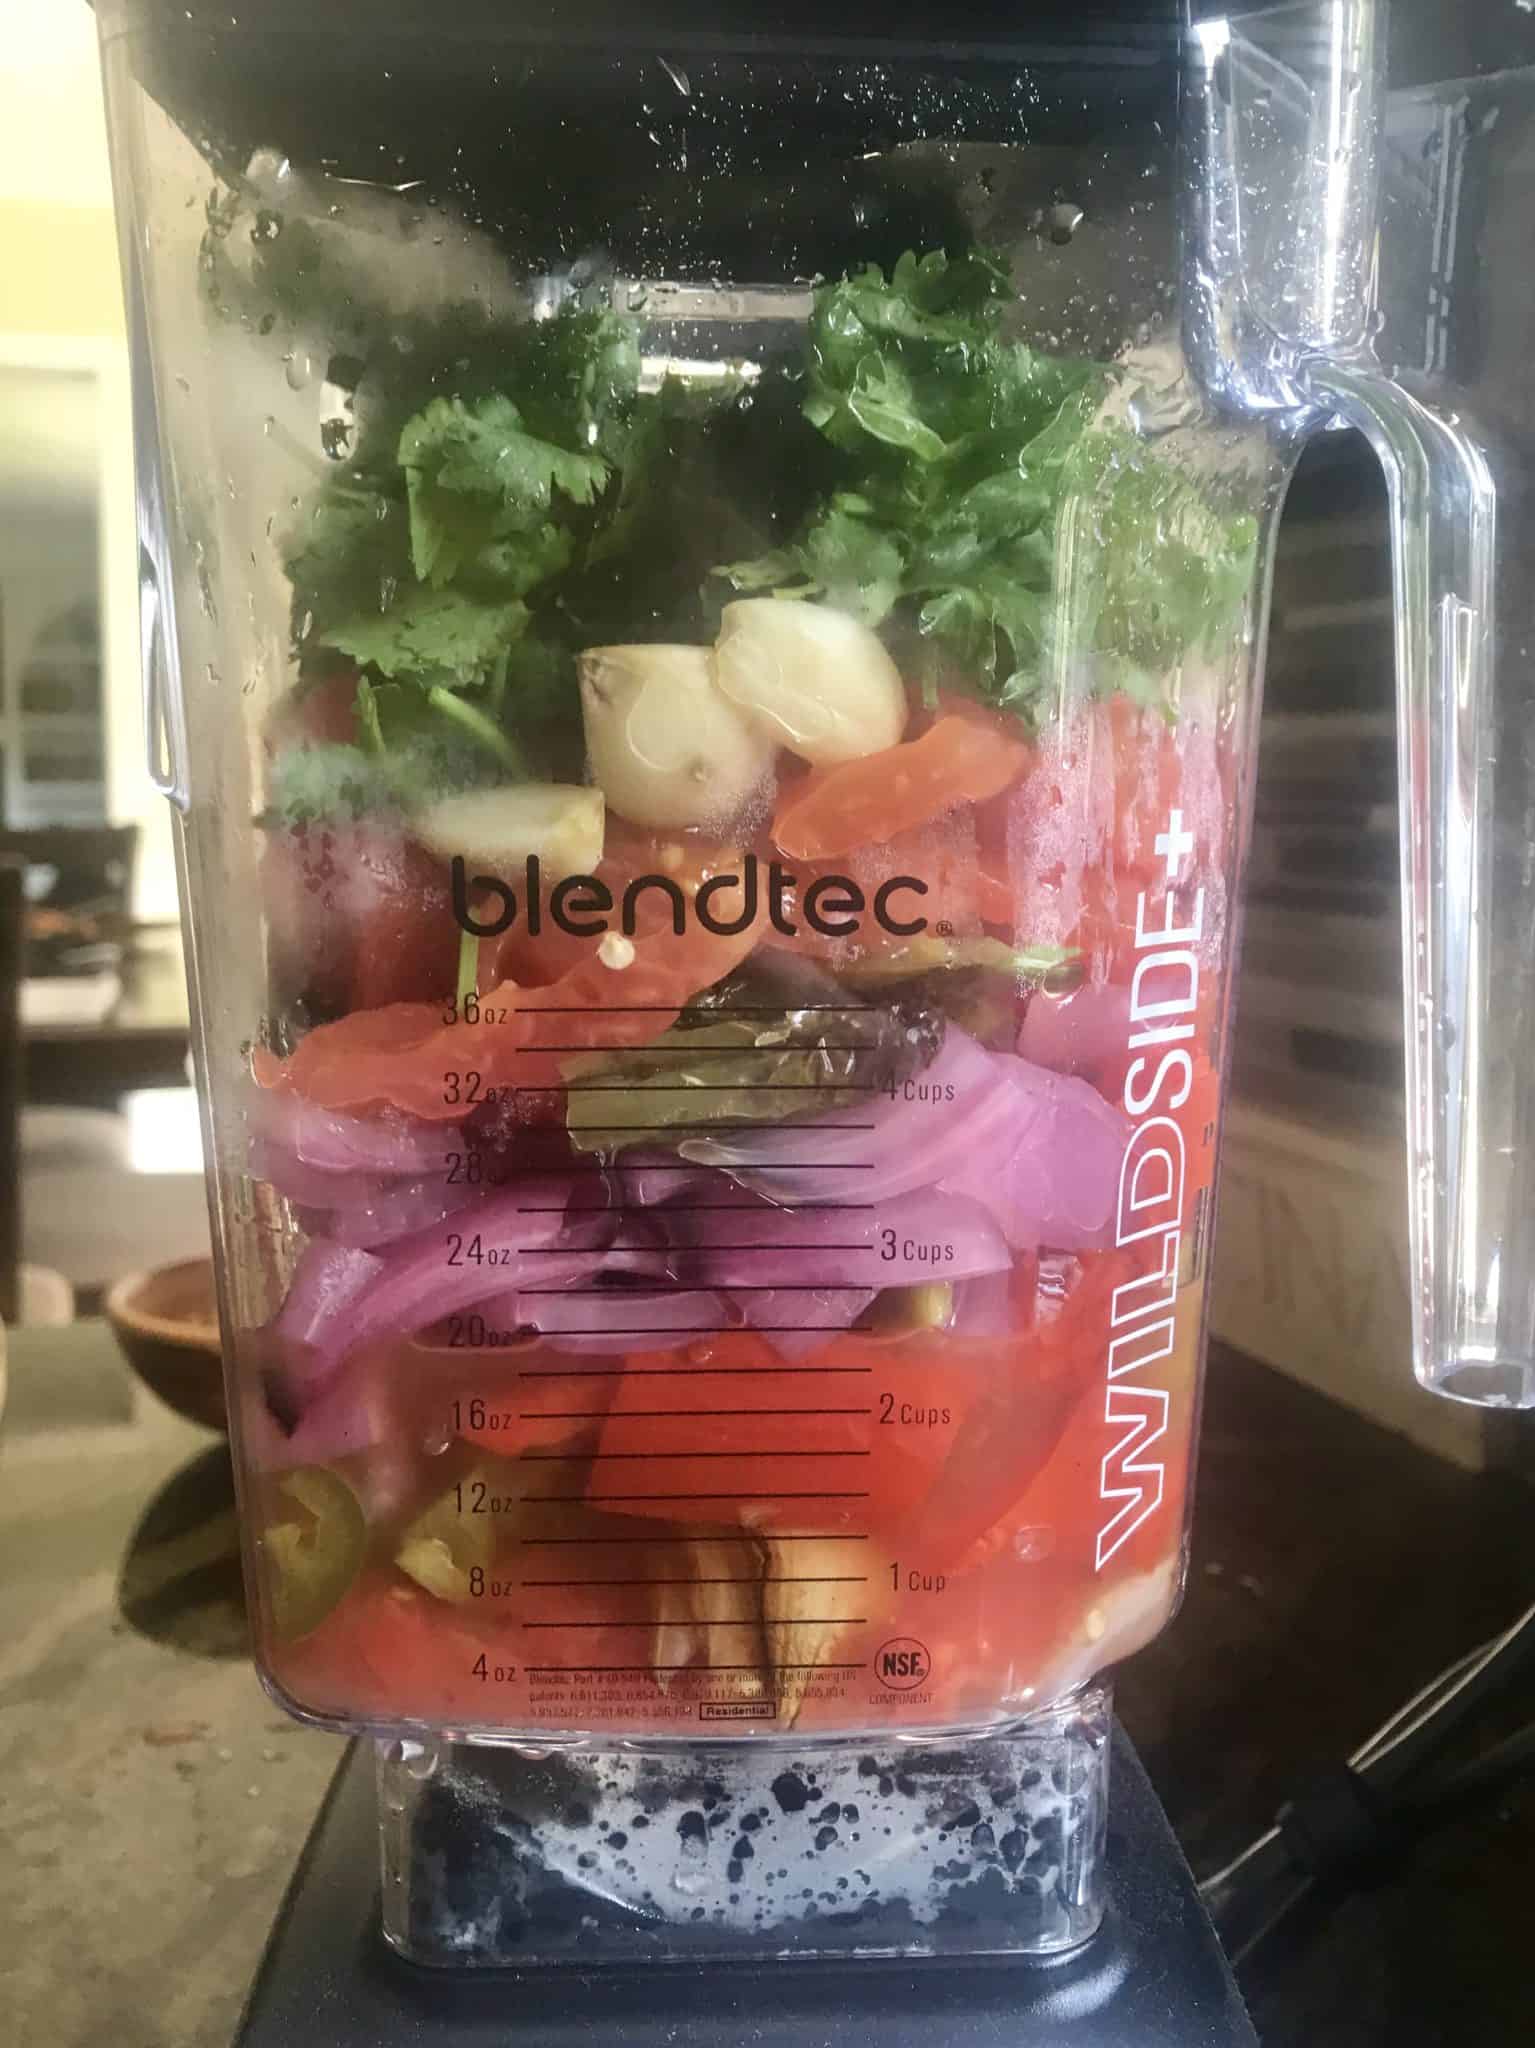 Fresh smoked vegetables and cilantro in blendtec blender side view